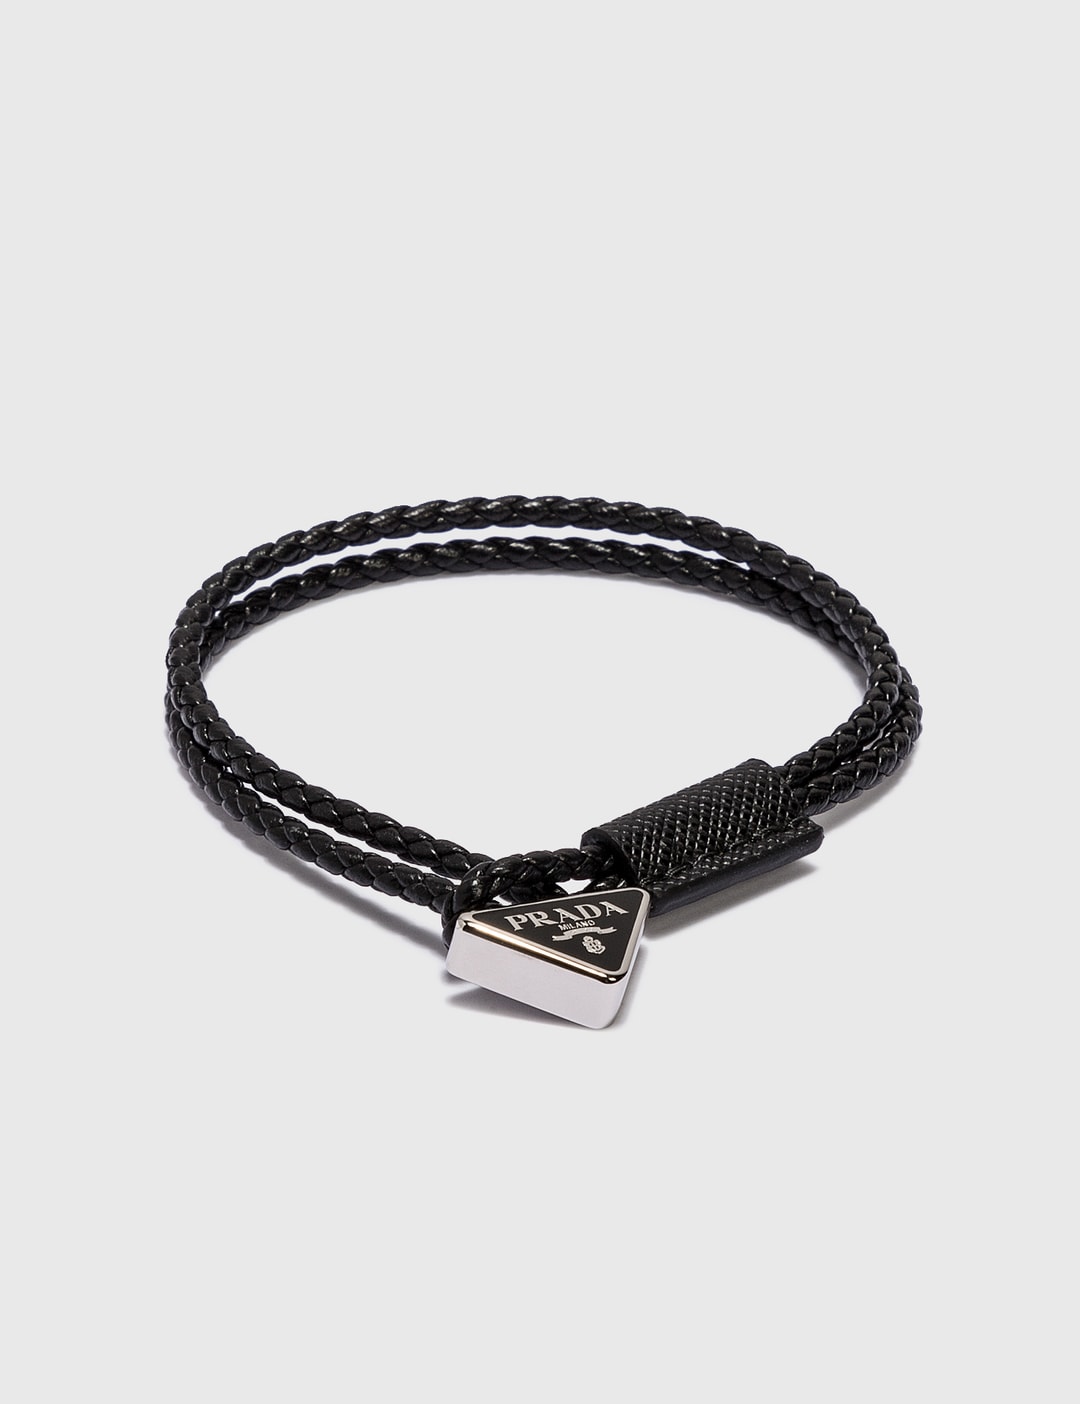 Prada - Braided Nappa Leather Bracelet | HBX - Globally Curated Fashion and  Lifestyle by Hypebeast